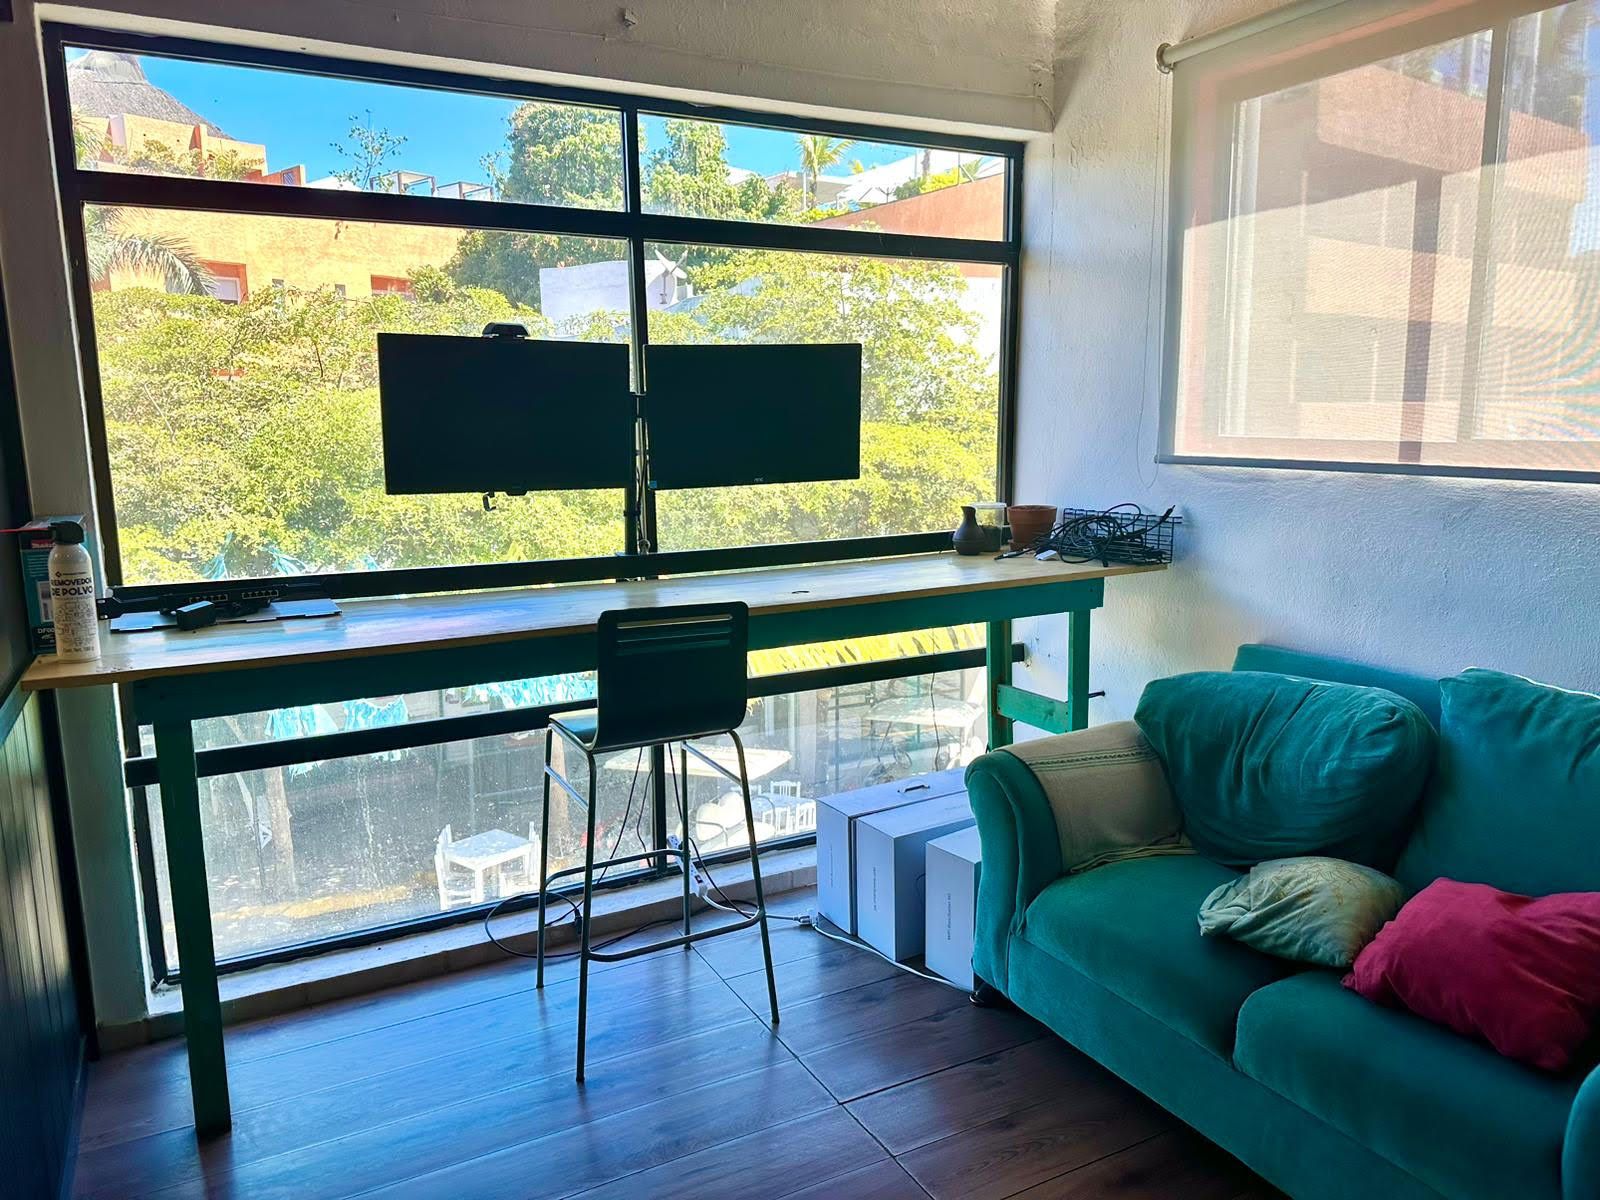 A private office room overlooking downtown Sayulita with an aquamarine couch and pink pillow